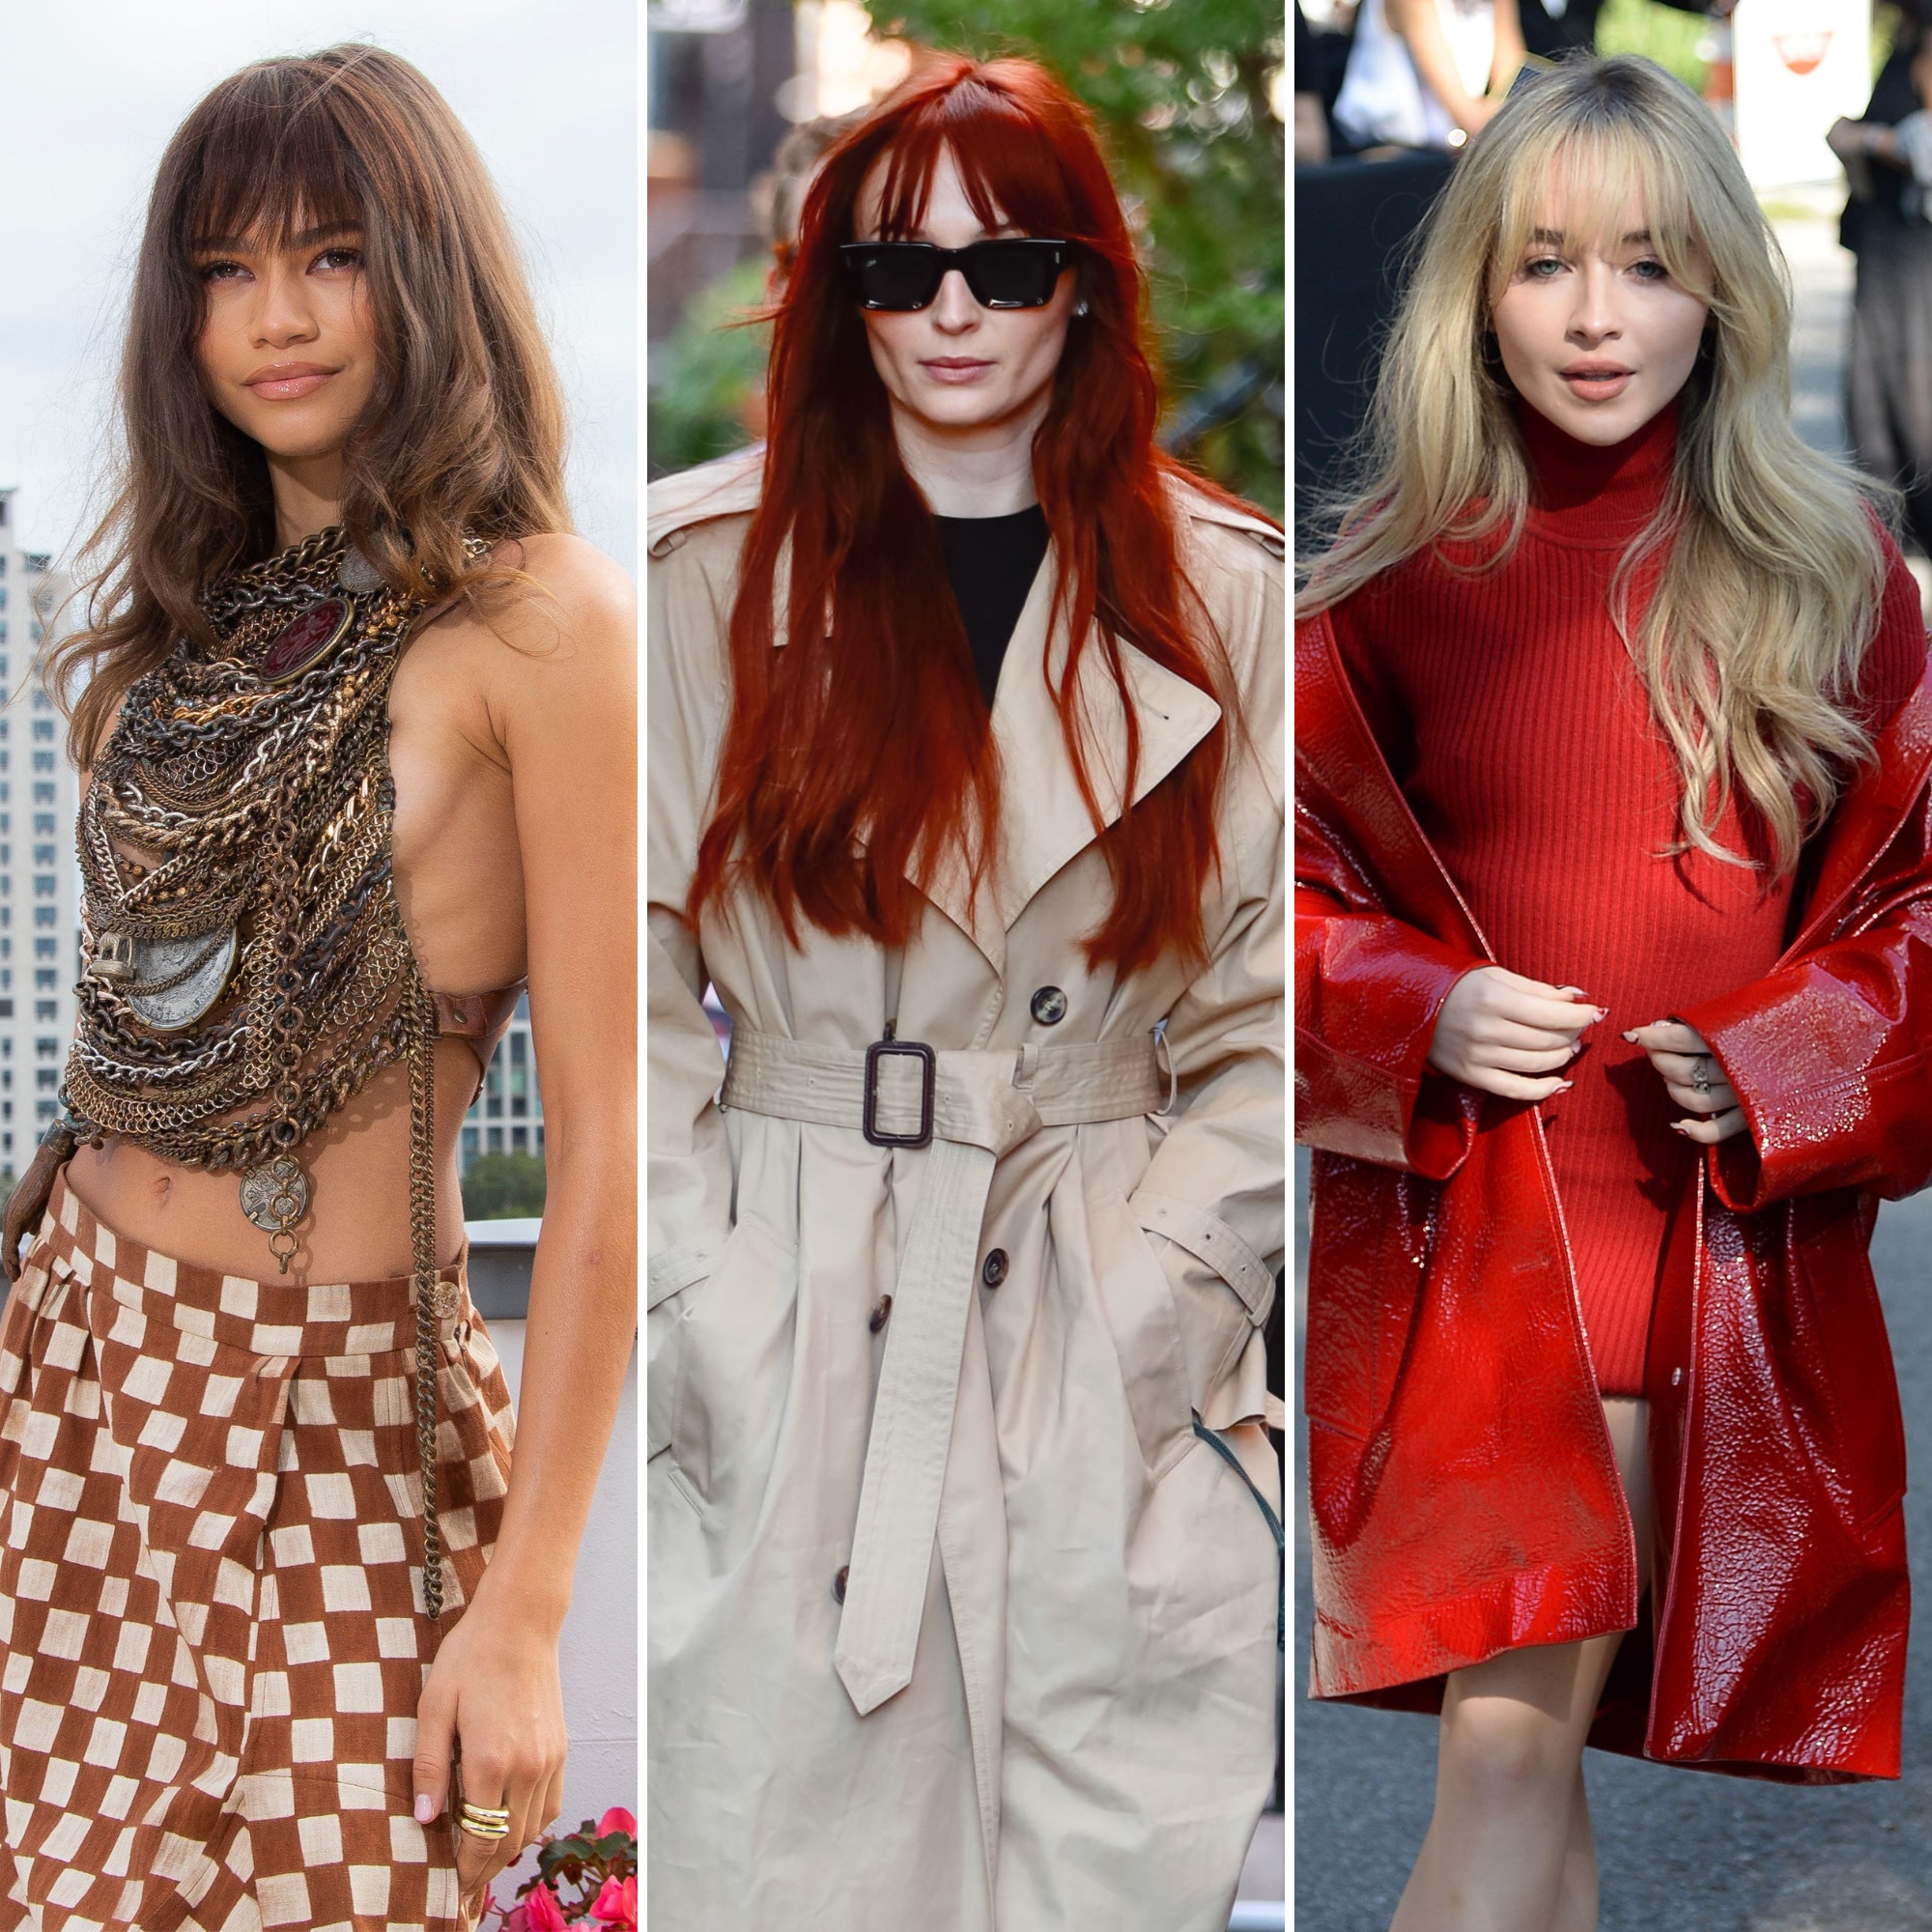 How to figure out if bangs (front fringes) will look good on my face  structure - Quora